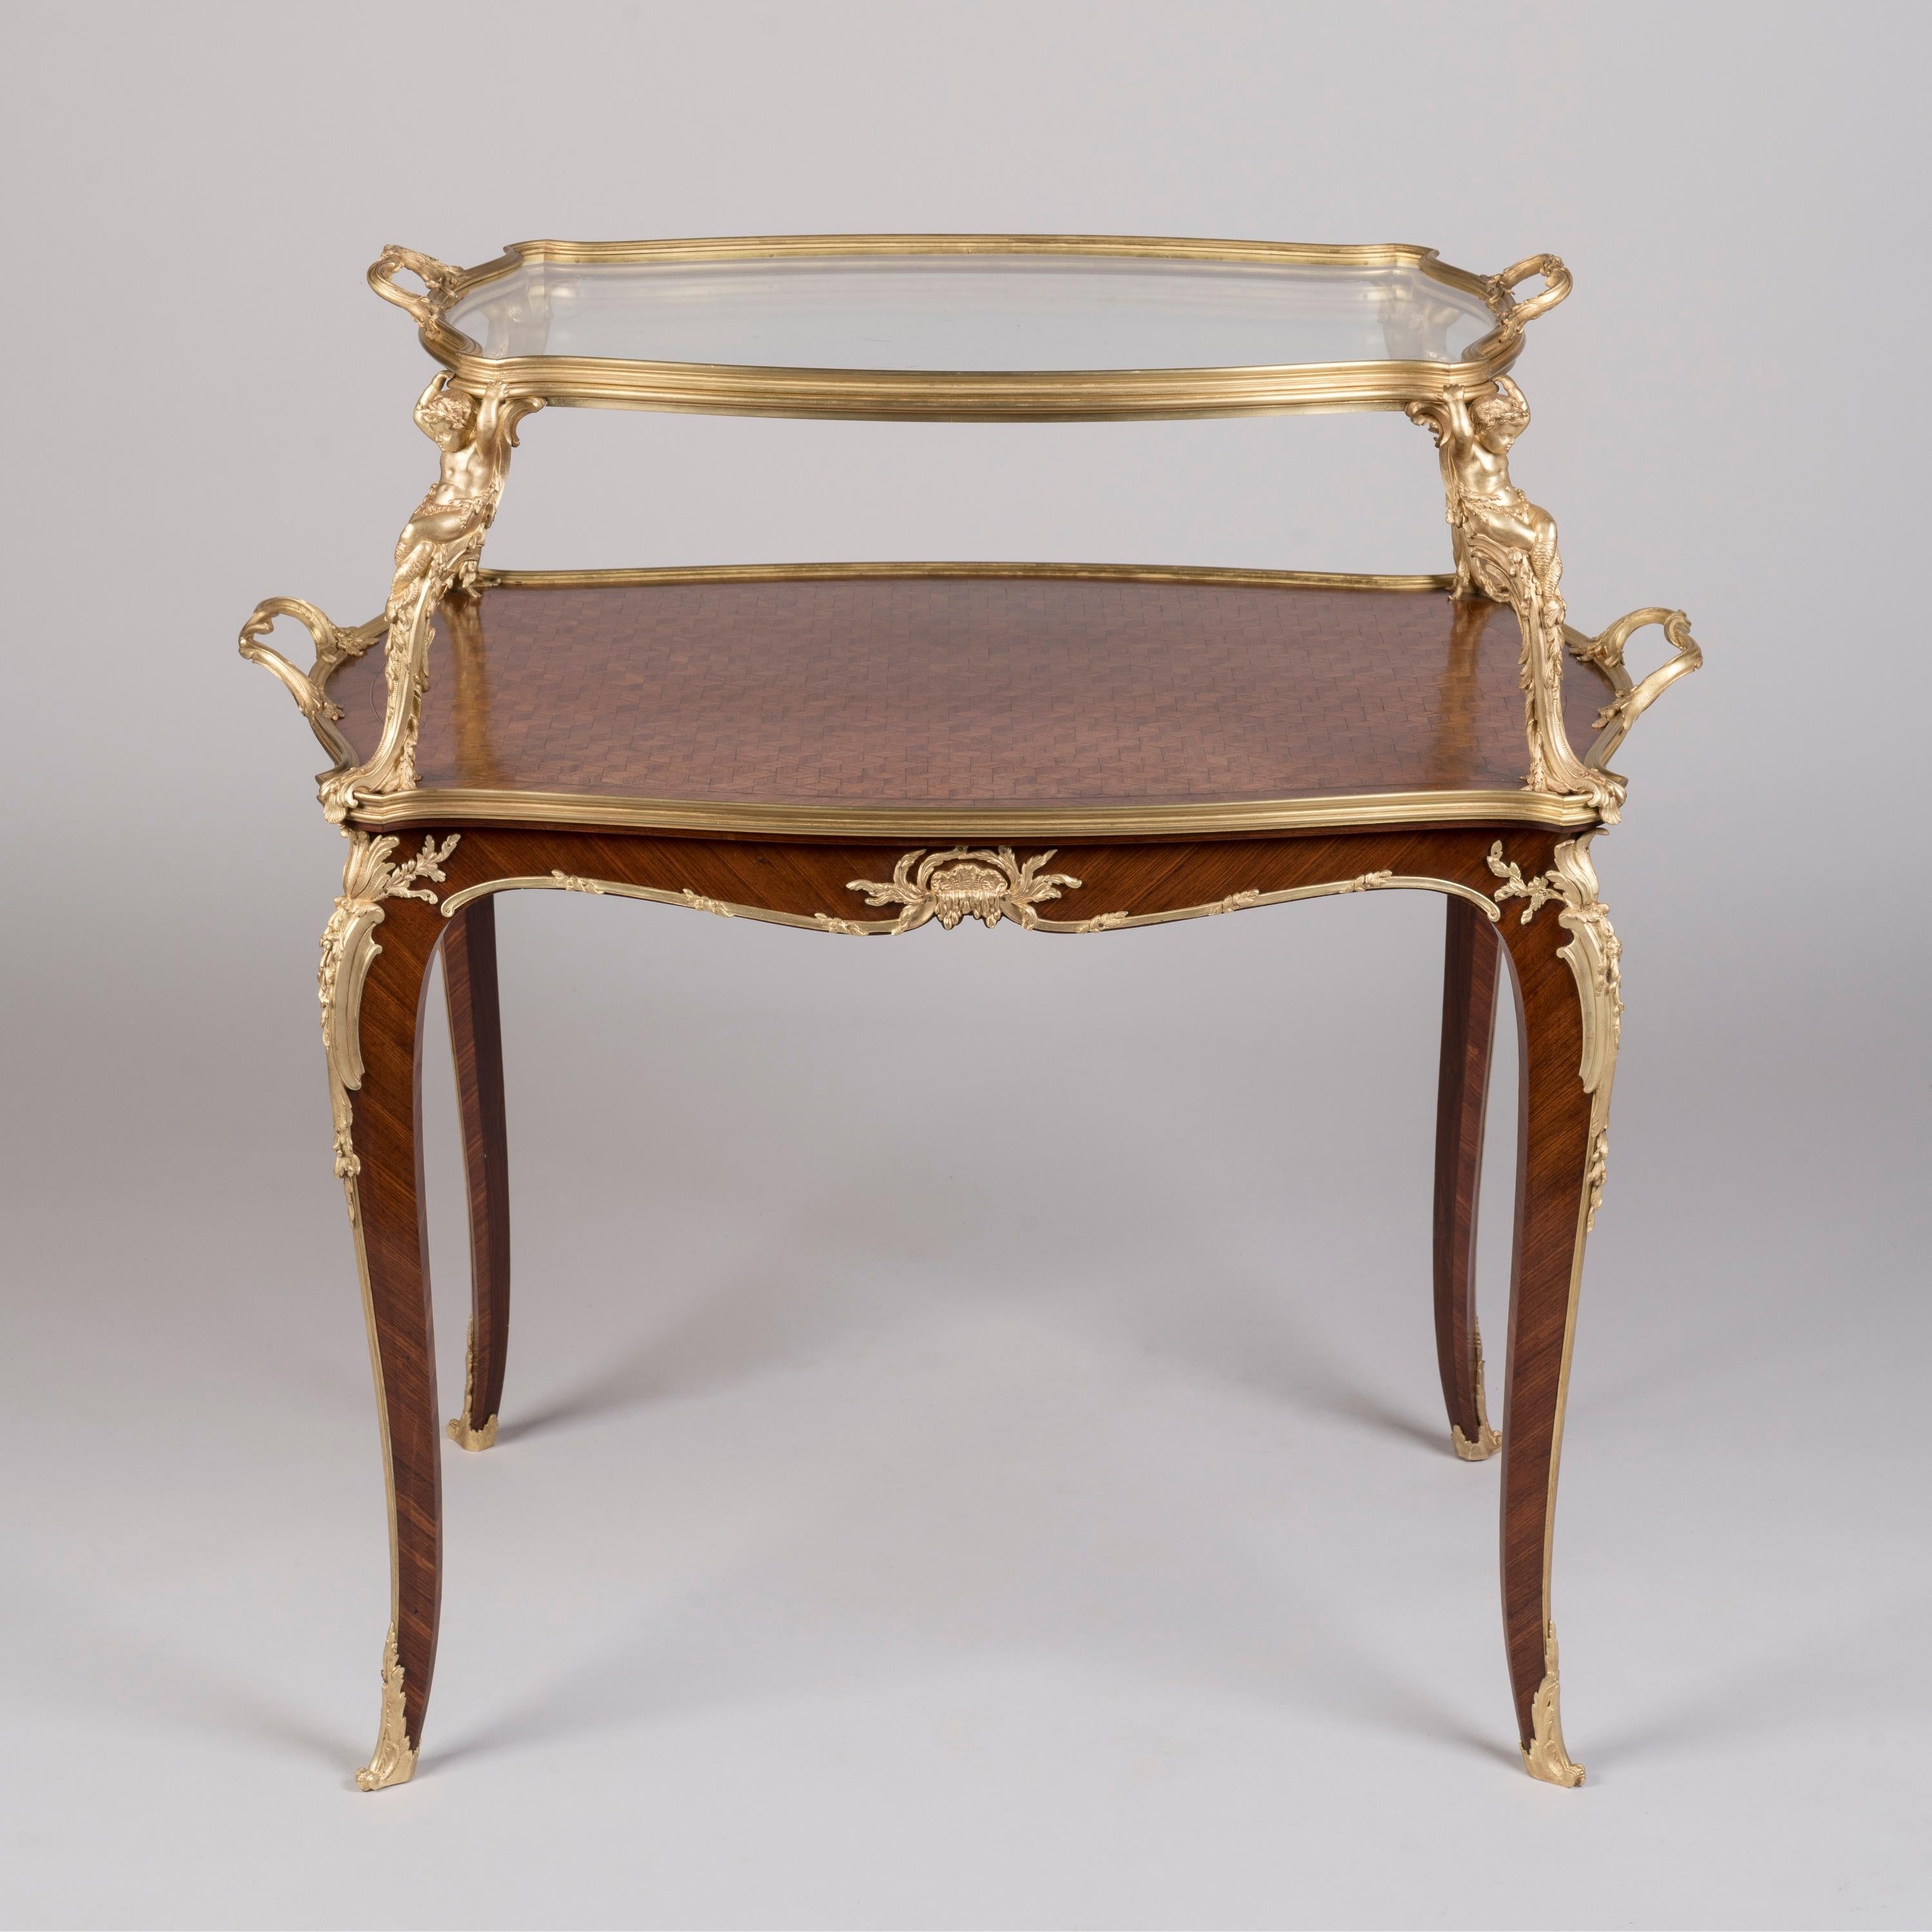 A Very Fine Louis XV Style 
Two-Tier Table à Thé

By François Linke. Index no. 610

The serpentine dual-handled upper-tier with removable glazed tray supported by four gilt bronze putti tritons, the kingwood lower-tier inlaid with cube satiné